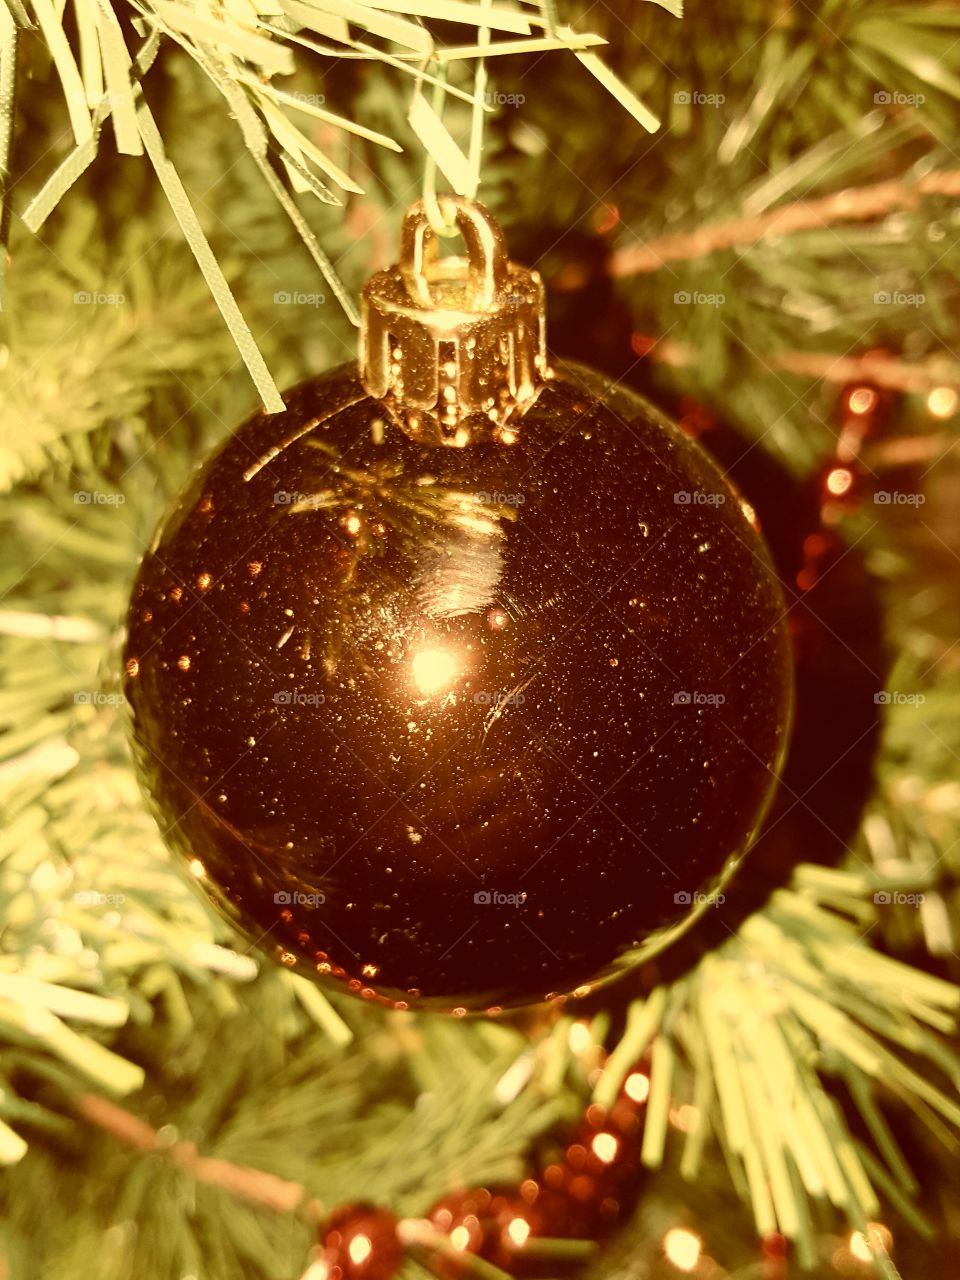 I remember the days when all photos had that "vintage" look. This Christmas ornament actually came out looking pretty snazzy!